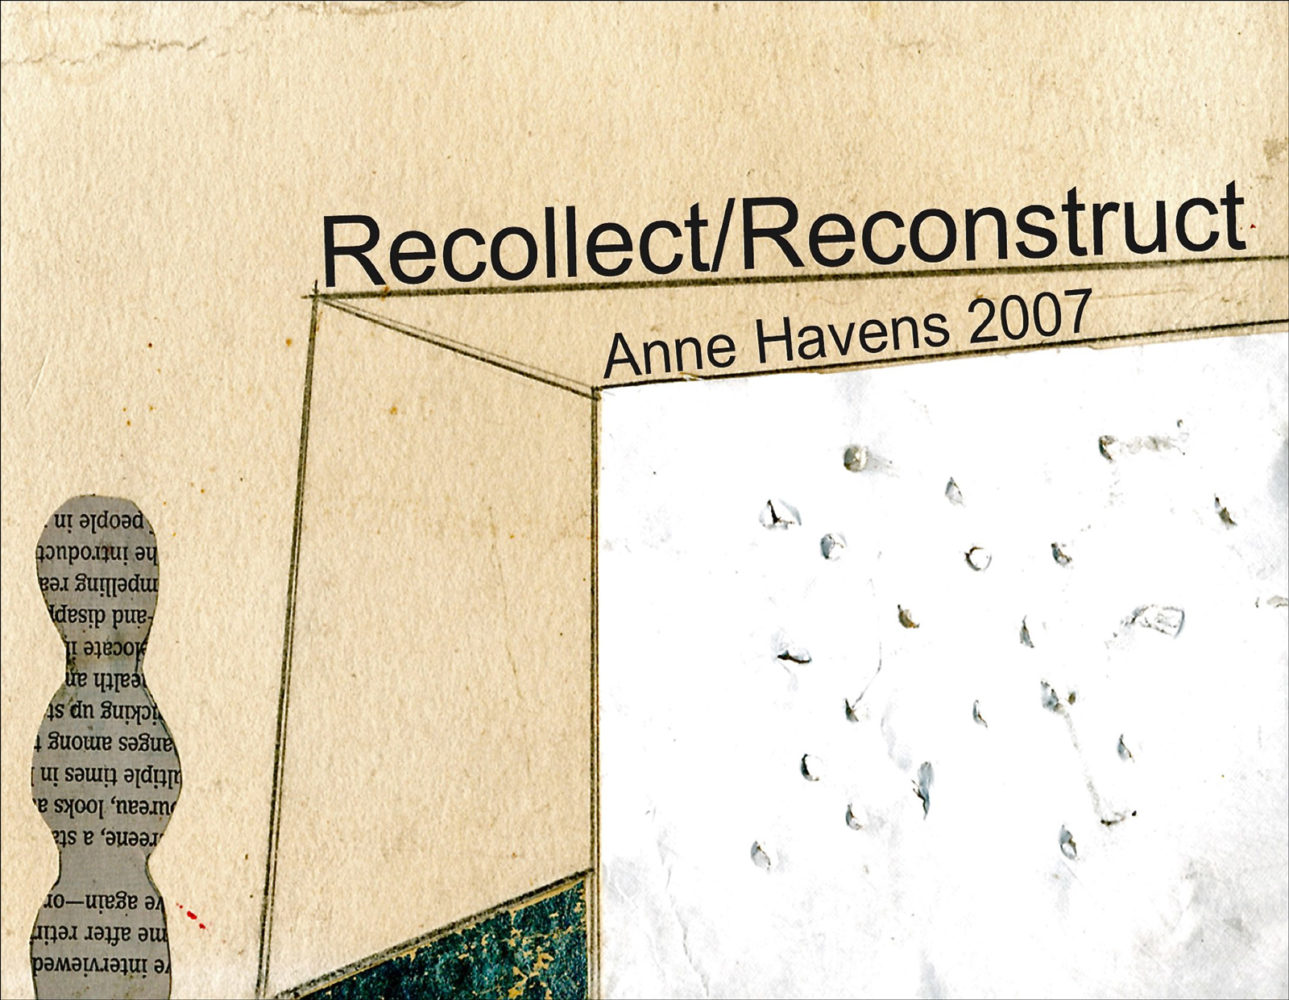 Cover of Anne Havens "Recollect/Reconstruct" 2007